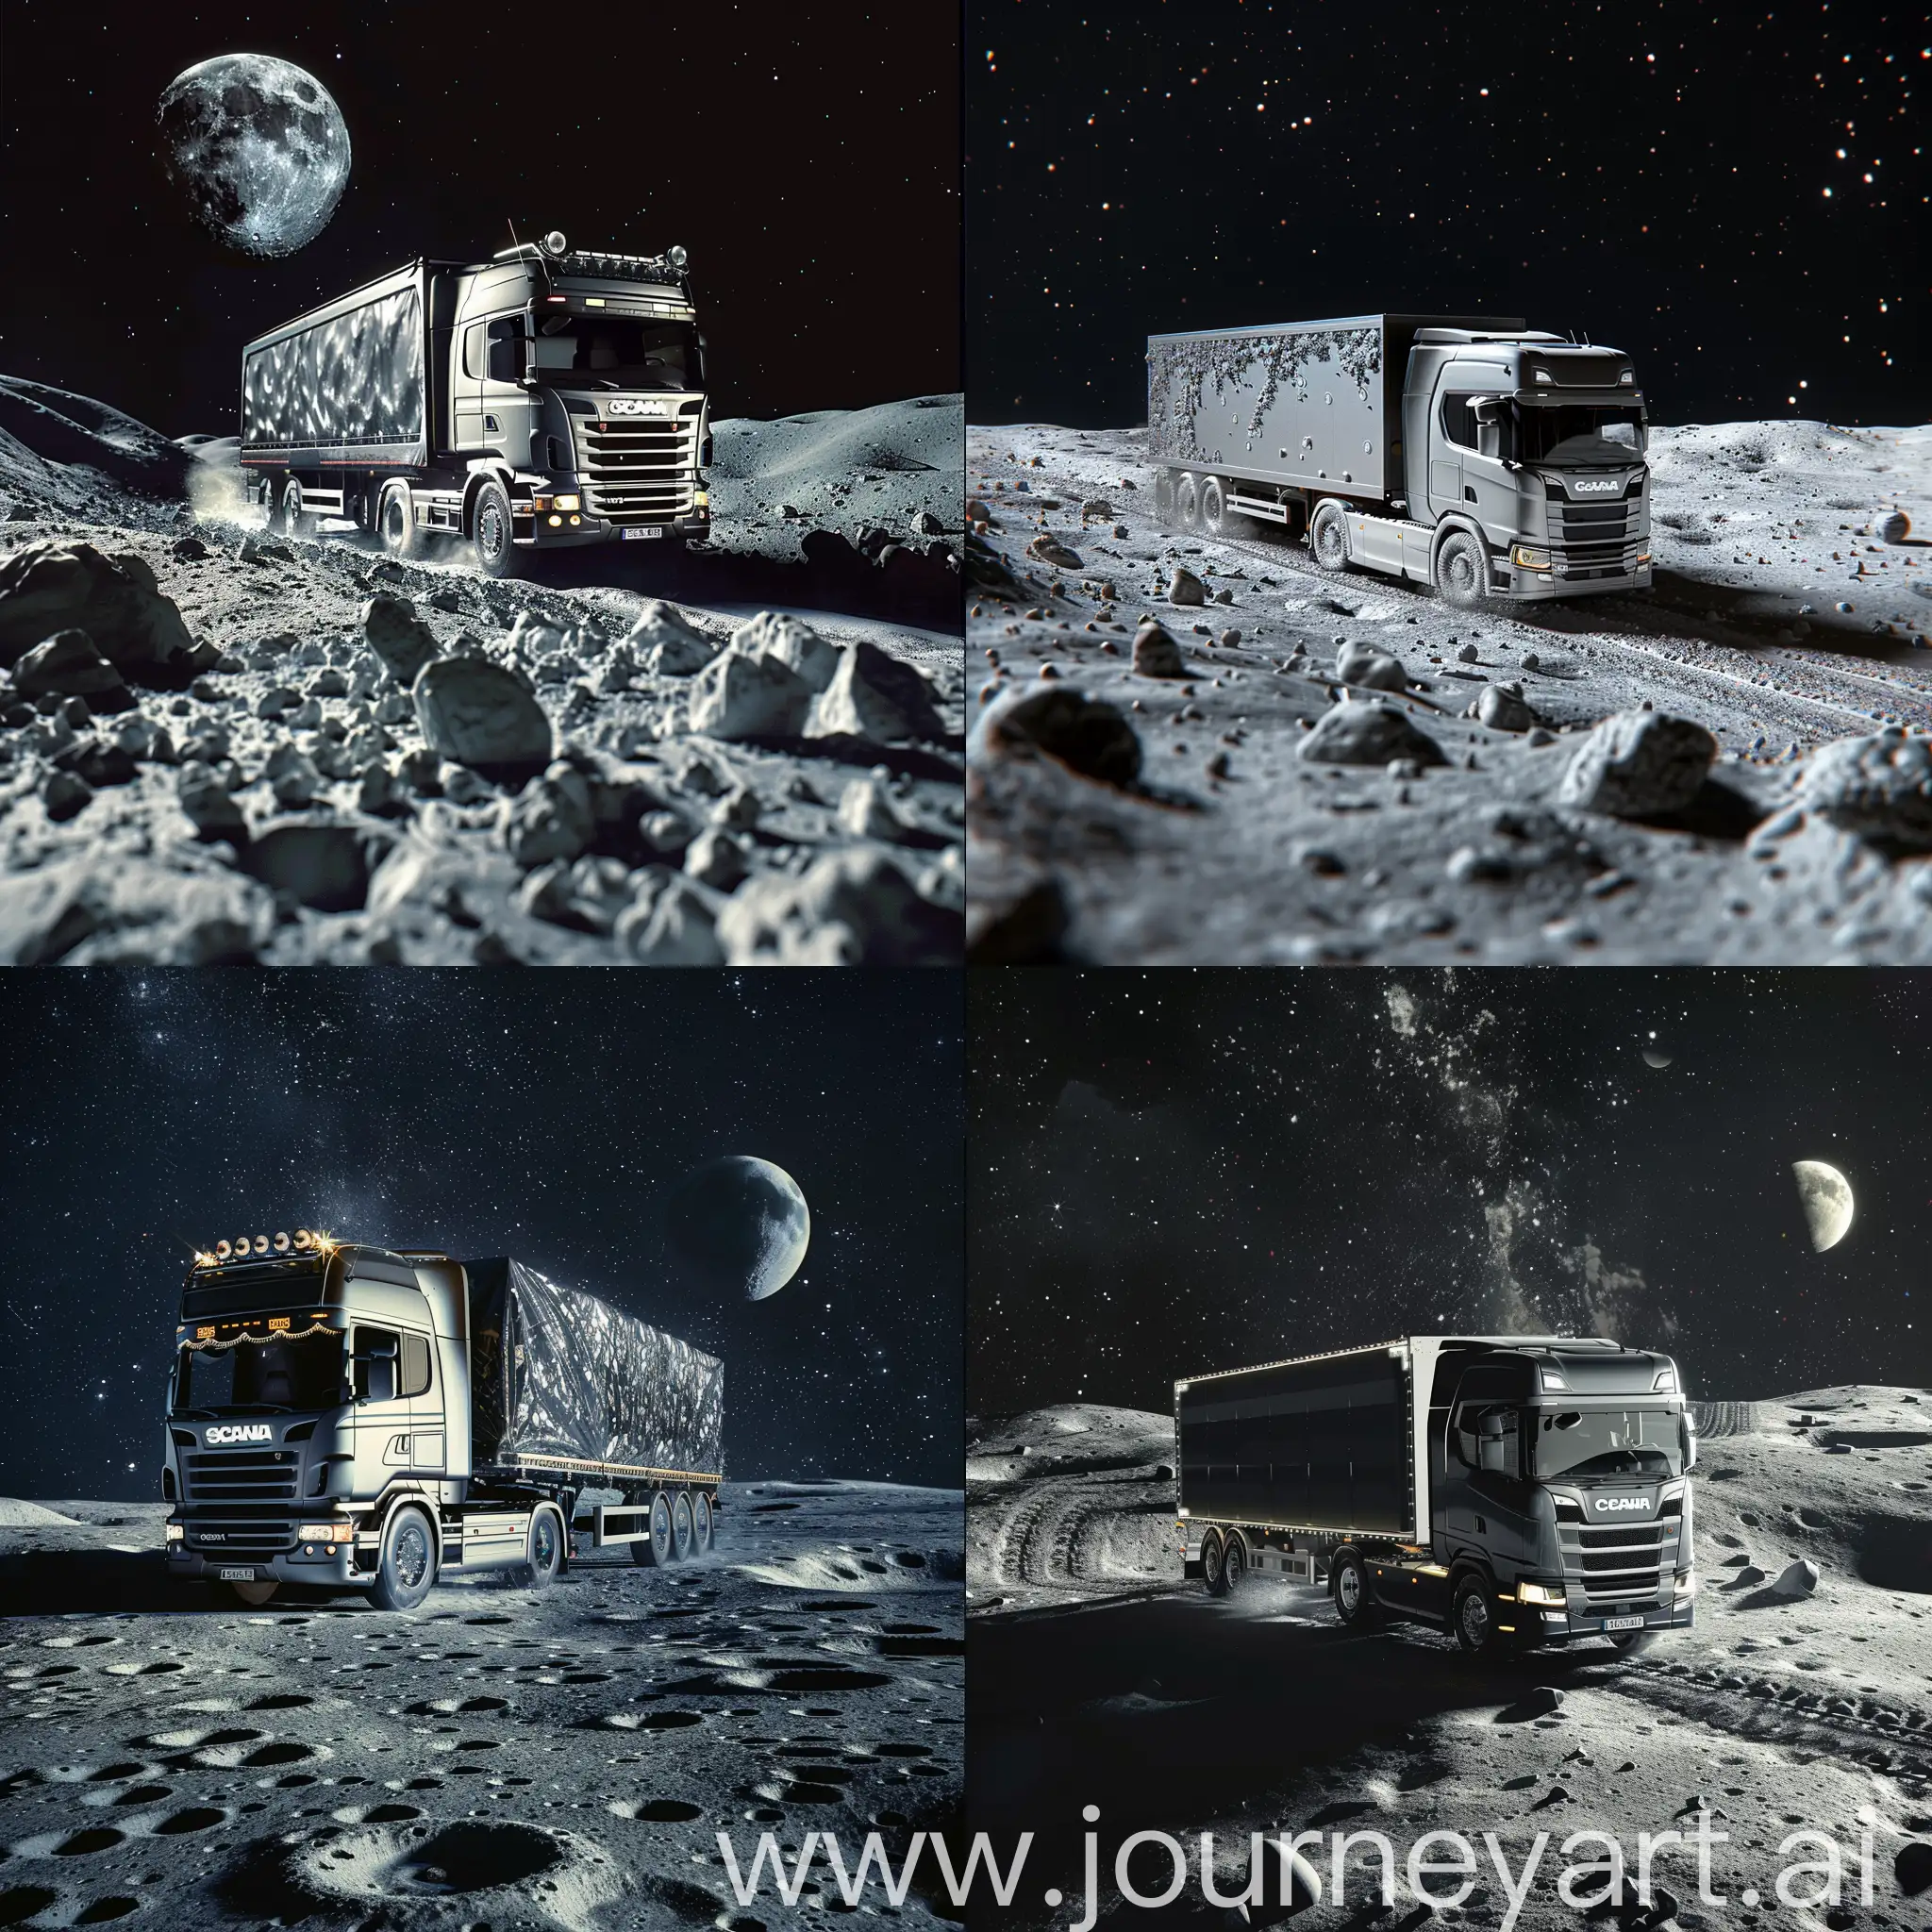 Scania-Truck-Delivering-Giant-Cargo-on-Moon-HD-Detailed-Image